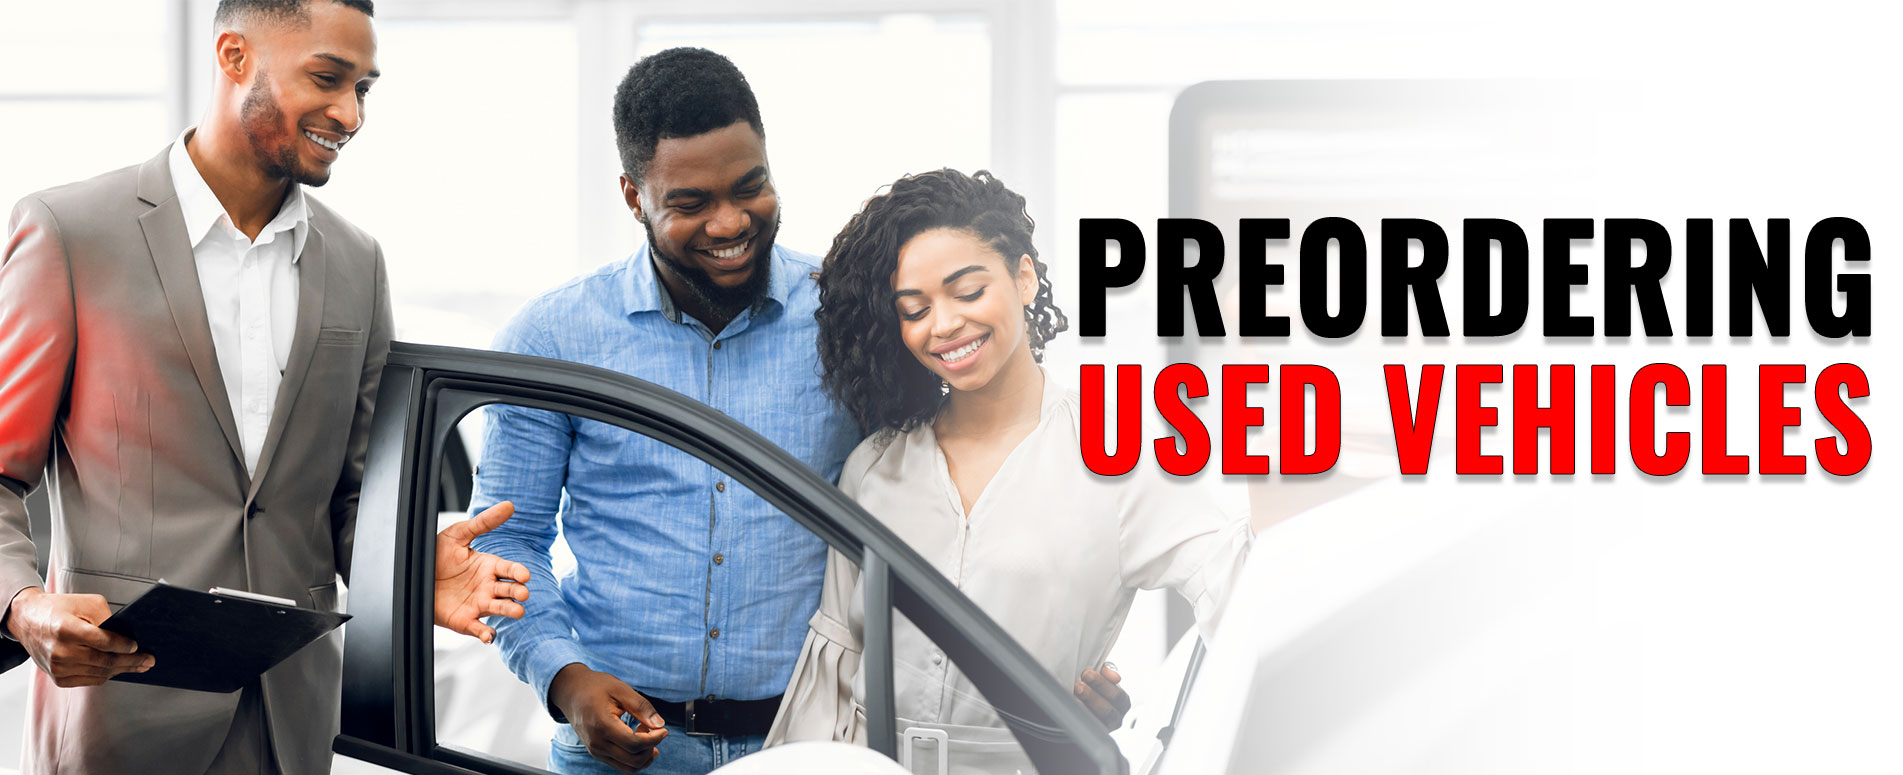 Preordering used vehicles